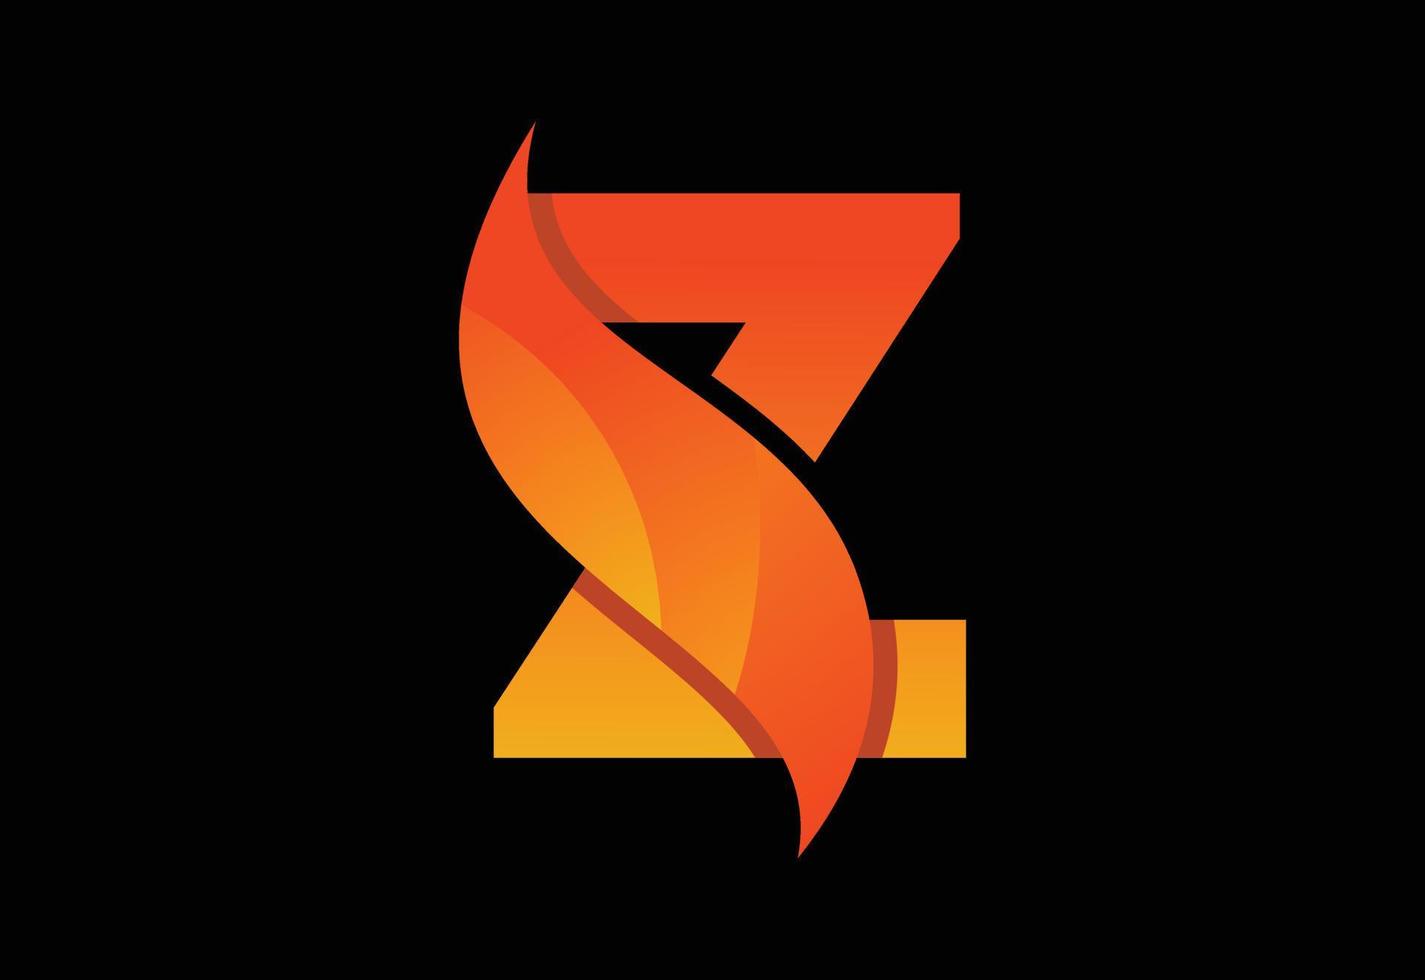 Initial Z monogram letter with a swoosh or flame. Fire flames or swoosh design vector illustration